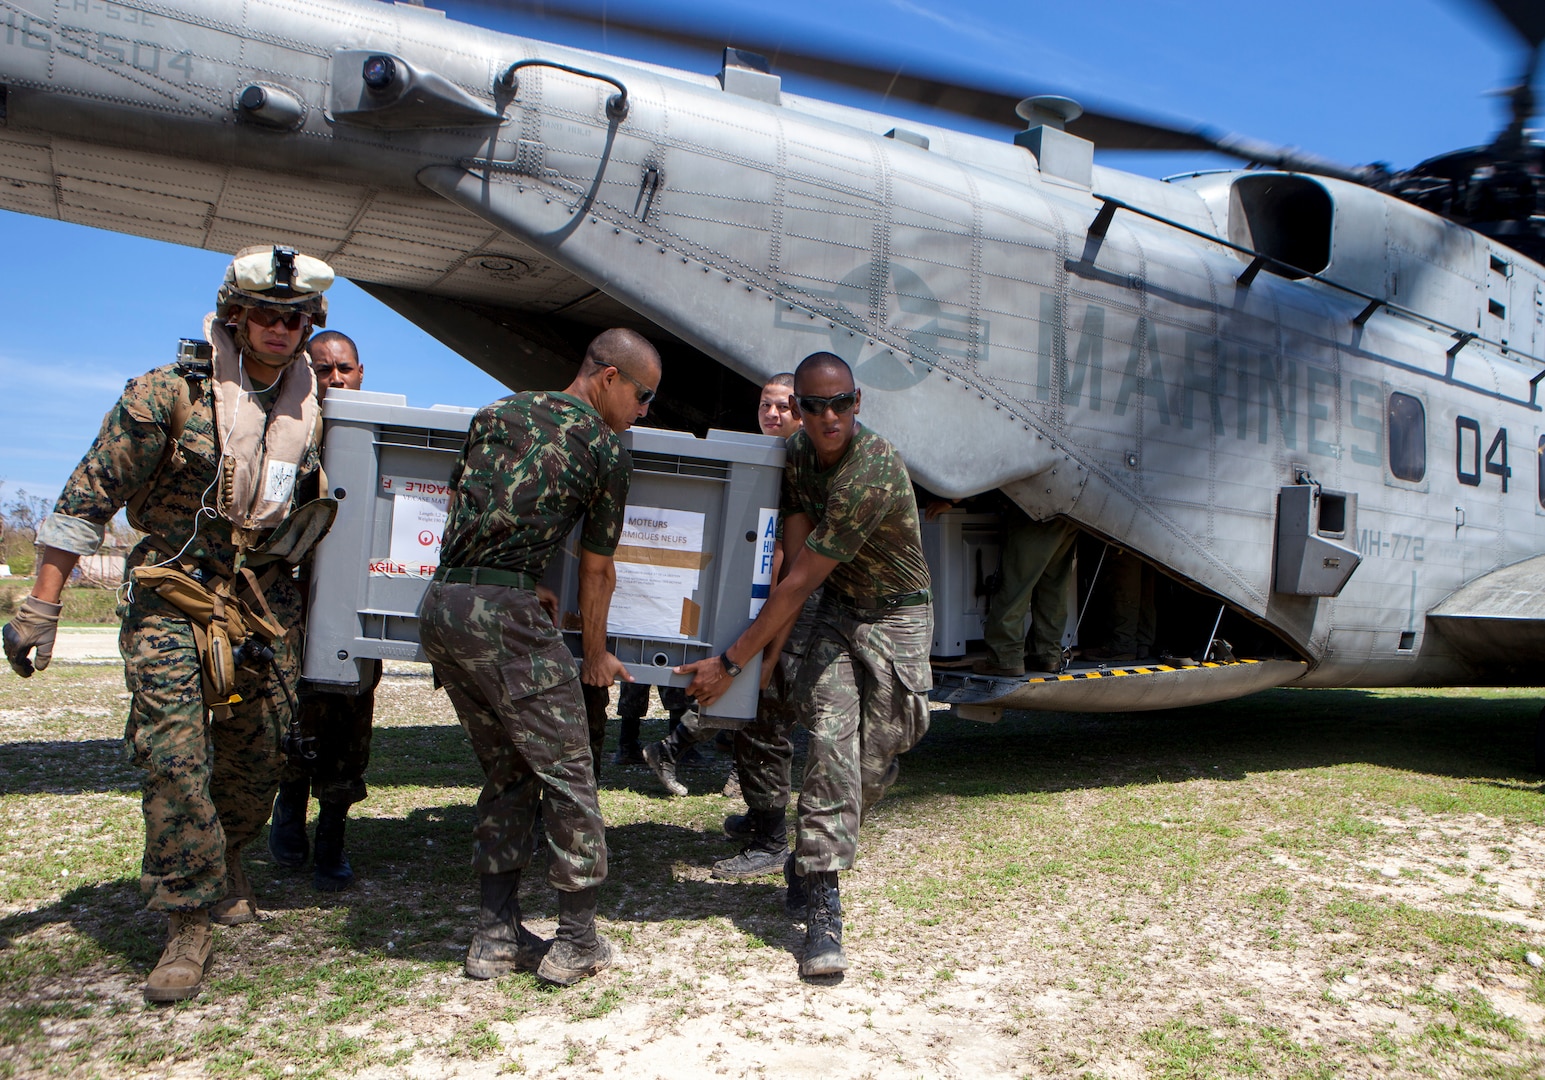 U.S. Marine Sgt. Jordan Becker, left, a cyber network specialist with Joint Task Force Matthew, offloads a generator from a CH-53E Super Stallion helicopter with the help of the Brazilian service members at Jeremie, Haiti, Oct. 15, 2016. After eight days of supply drop operations JTF Matthew has delivered over 478,000 pounds of supplies utilizing various military aircraft. JTF Matthew, a U.S. Southern Command-directed team comprised of Marines, soldiers, sailors and airmen, is providing critical airlift capabilities during the initial stages of the U.S. Agency for International Development's disaster relief operations in Haiti while the international response builds.